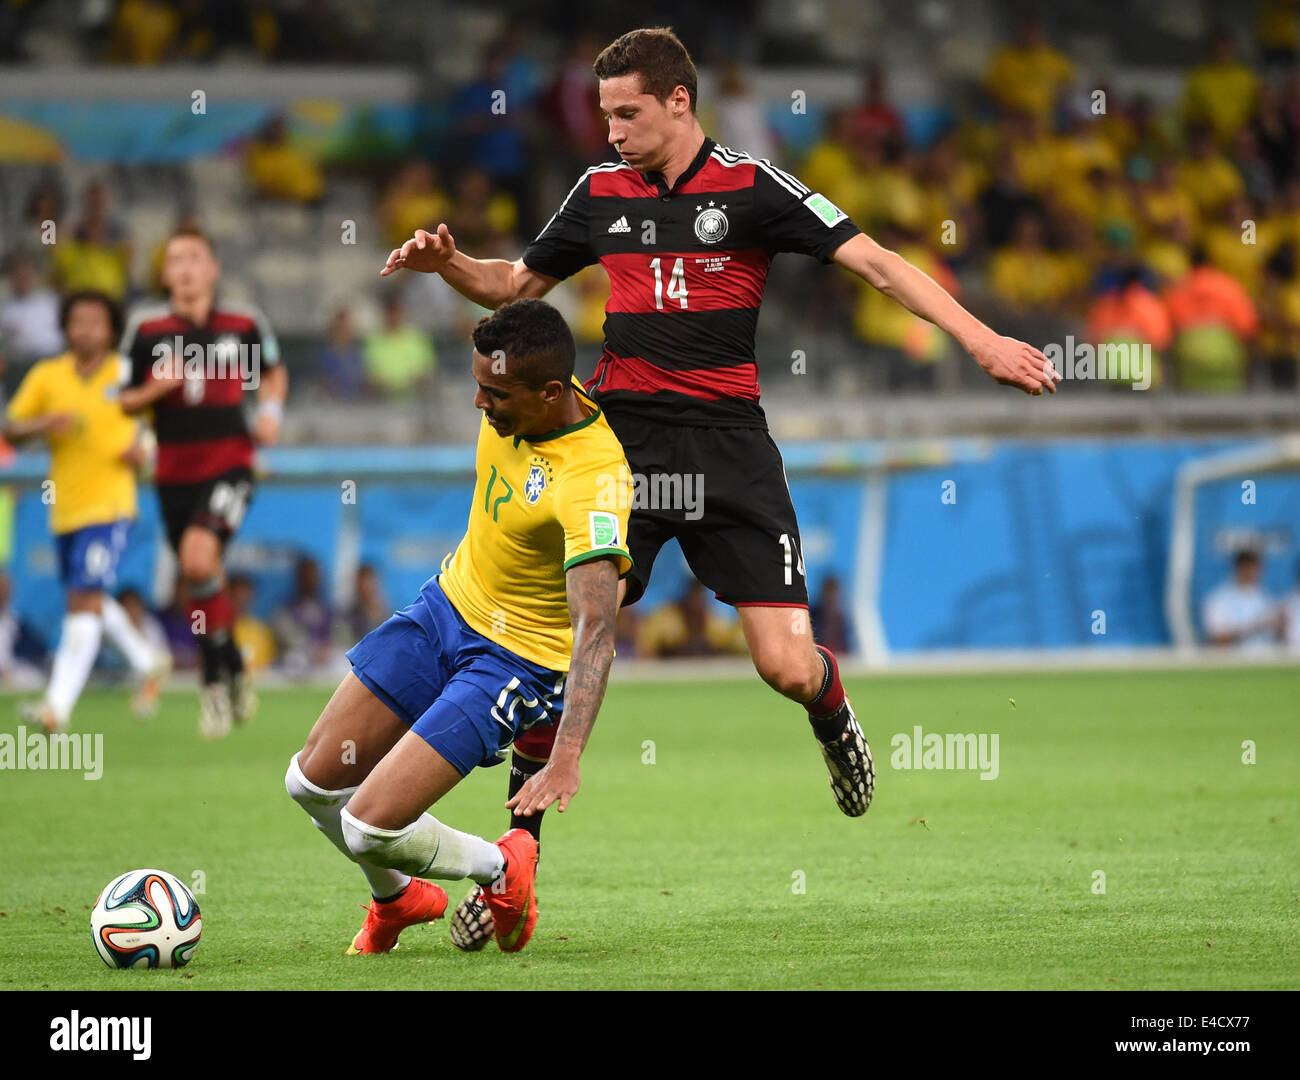 Belo Horizonte, Brazil. 8th July, 2014. Brazil's Luiz Gustavo (L) vies with Germany's Julian Draxler during a semifinal match between Brazil and Germany of 2014 FIFA World Cup at the Estadio Mineirao Stadium in Belo Horizonte, Brazil, on July 8, 2014. Germany won 7-1 over Brazil and qualified for the final on Tuesday. Credit:  Li Ga/Xinhua/Alamy Live News Stock Photo